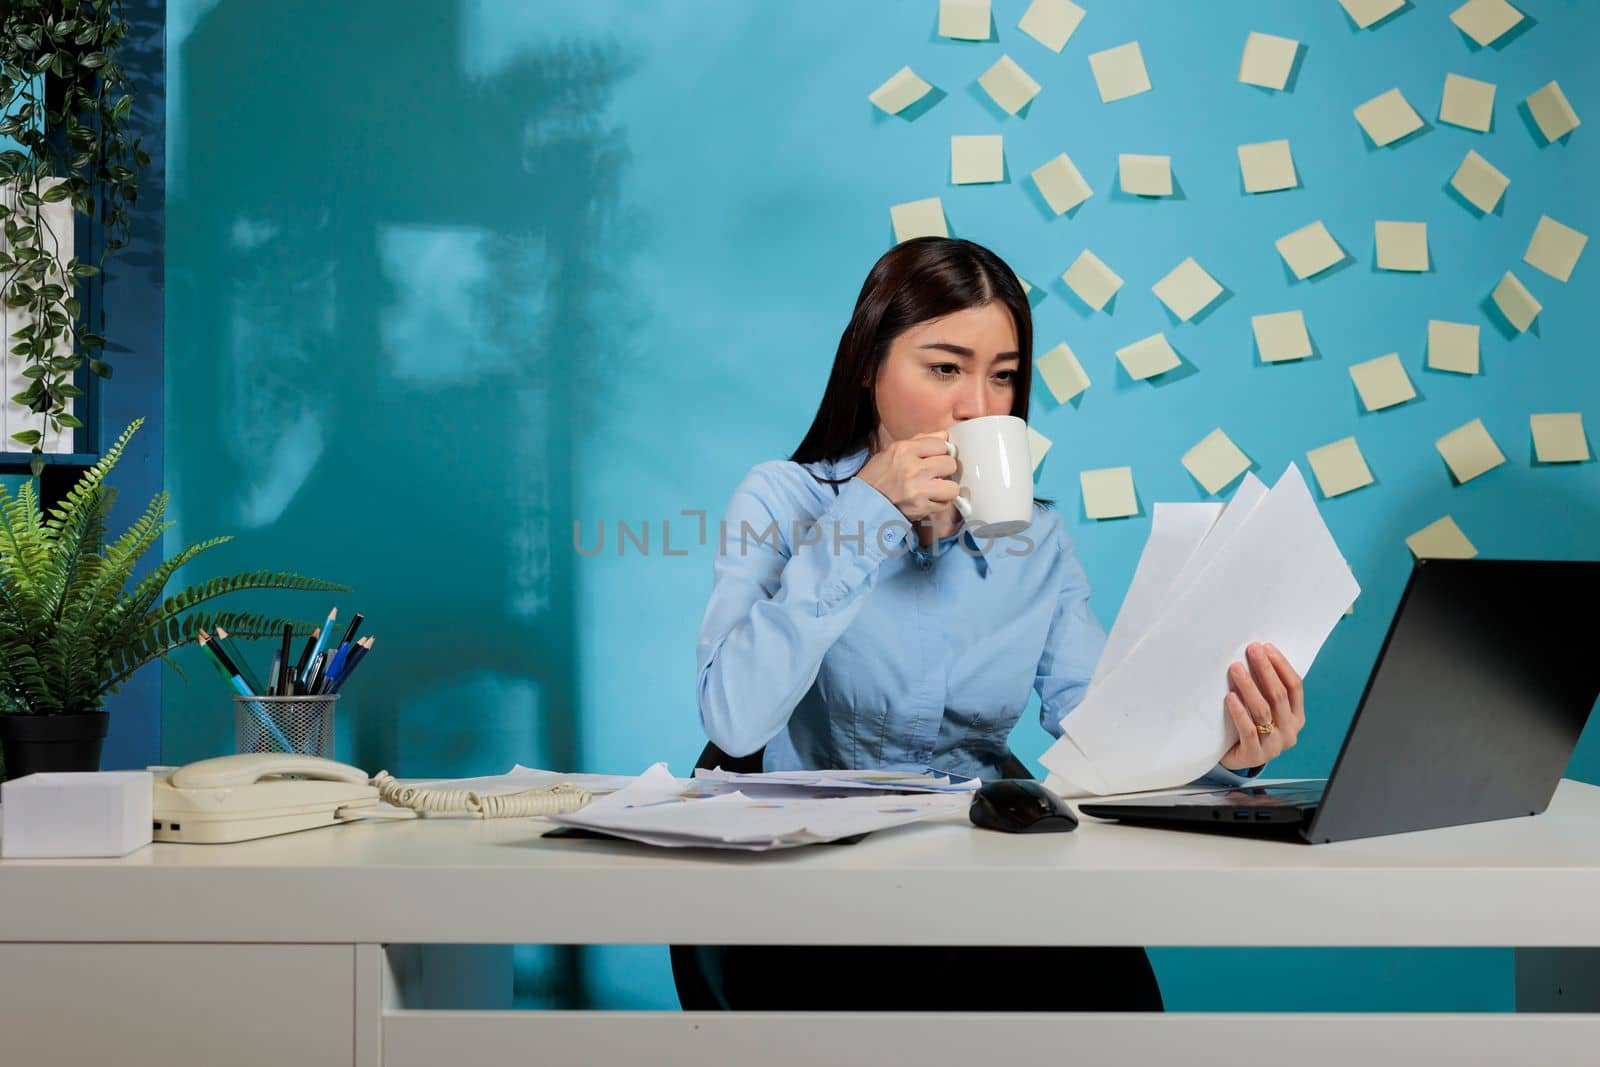 Corporate female auditor sitting at office desk analyzing financial reports of startup company. Professional woman drinking cup of coffee while comparing digital information and printed paperwork.